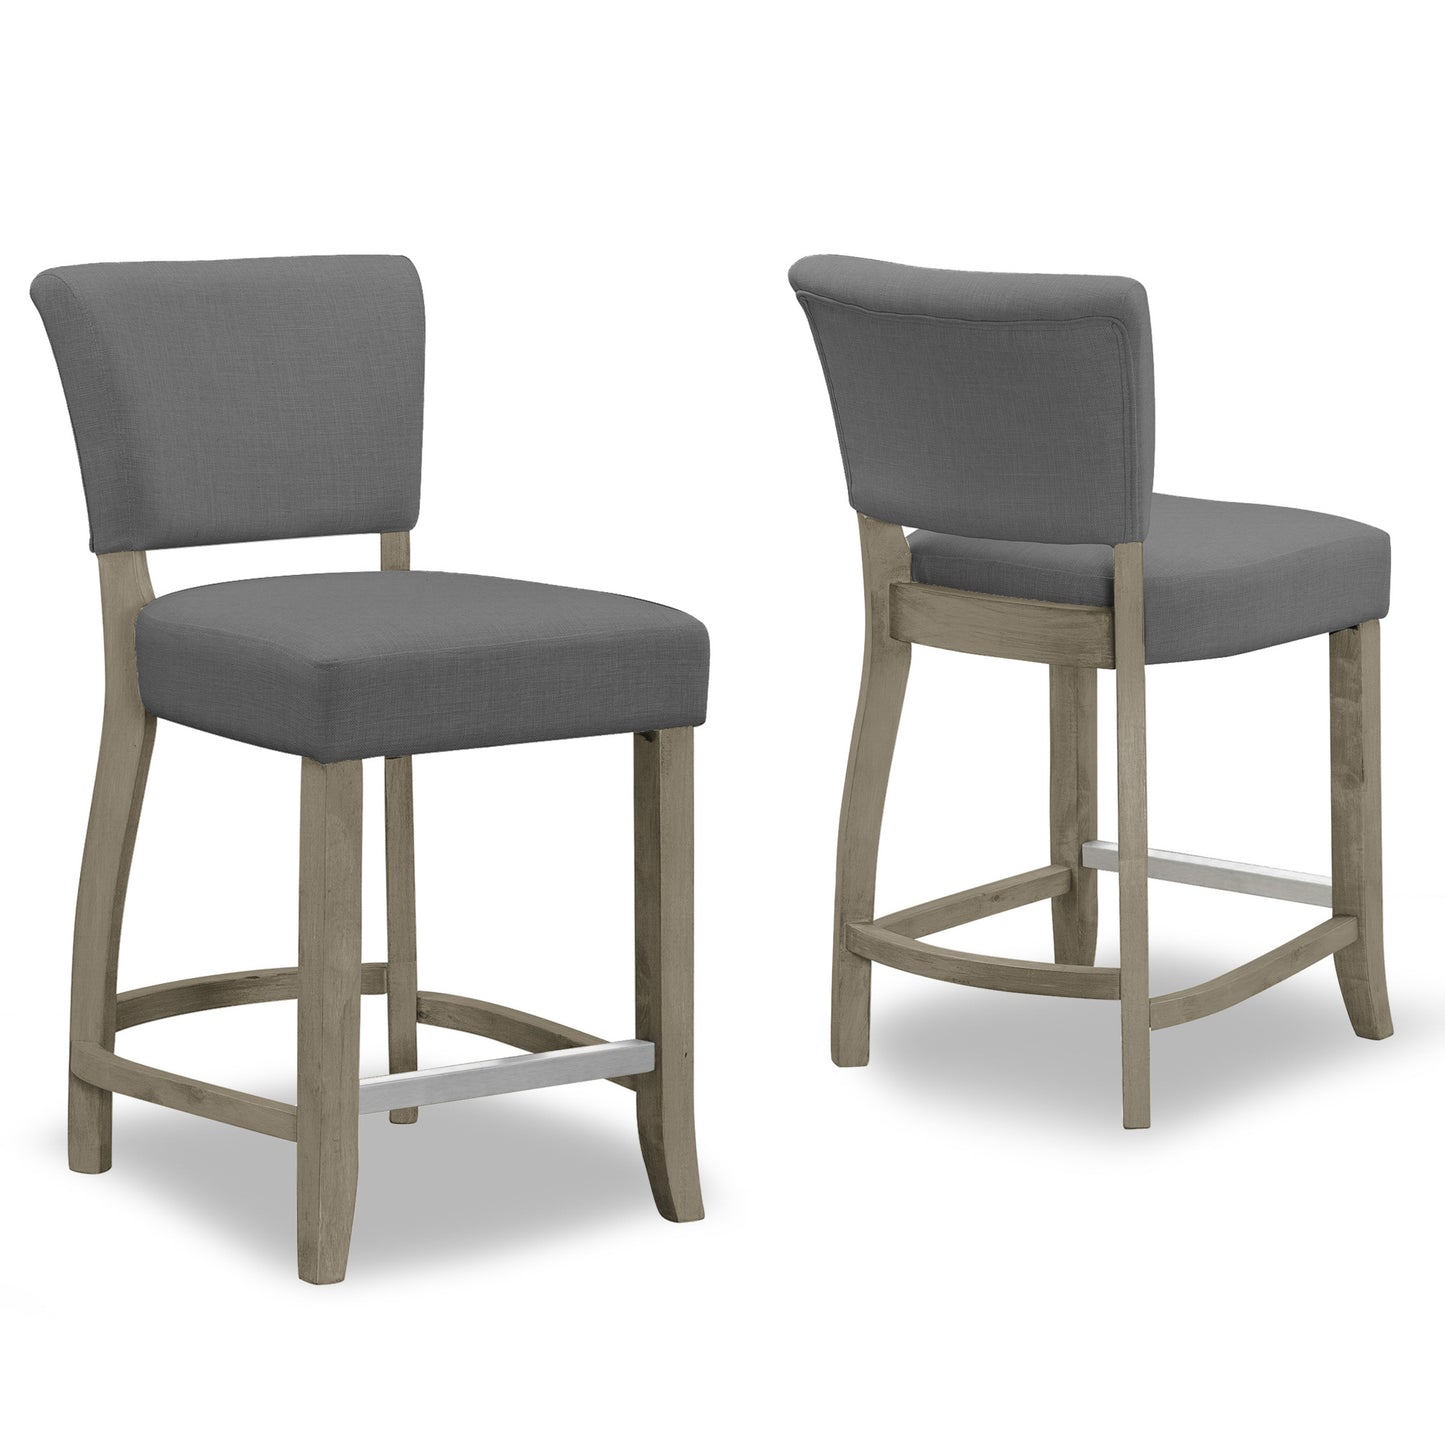 Set of 2 Aleck Grey Fabric Counter Stool with Antique Finish Wood Legs